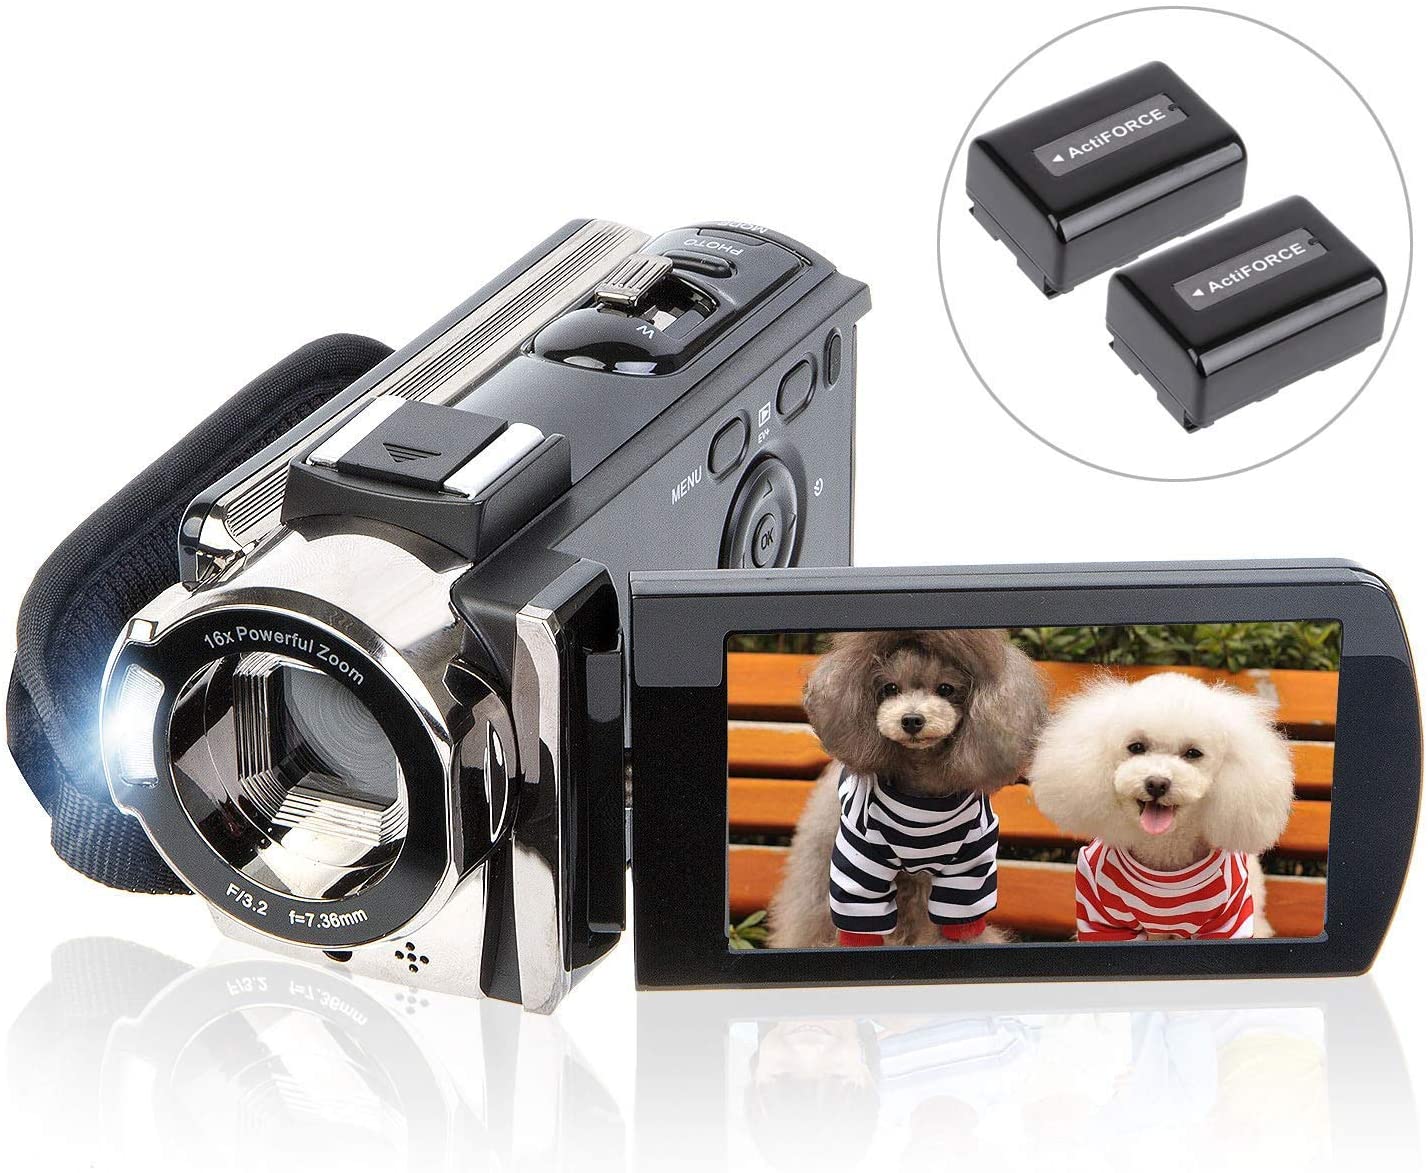 3 Inches With 270 Degrees Of Rotation Screen From Camcorder Vlogging Camera Kit